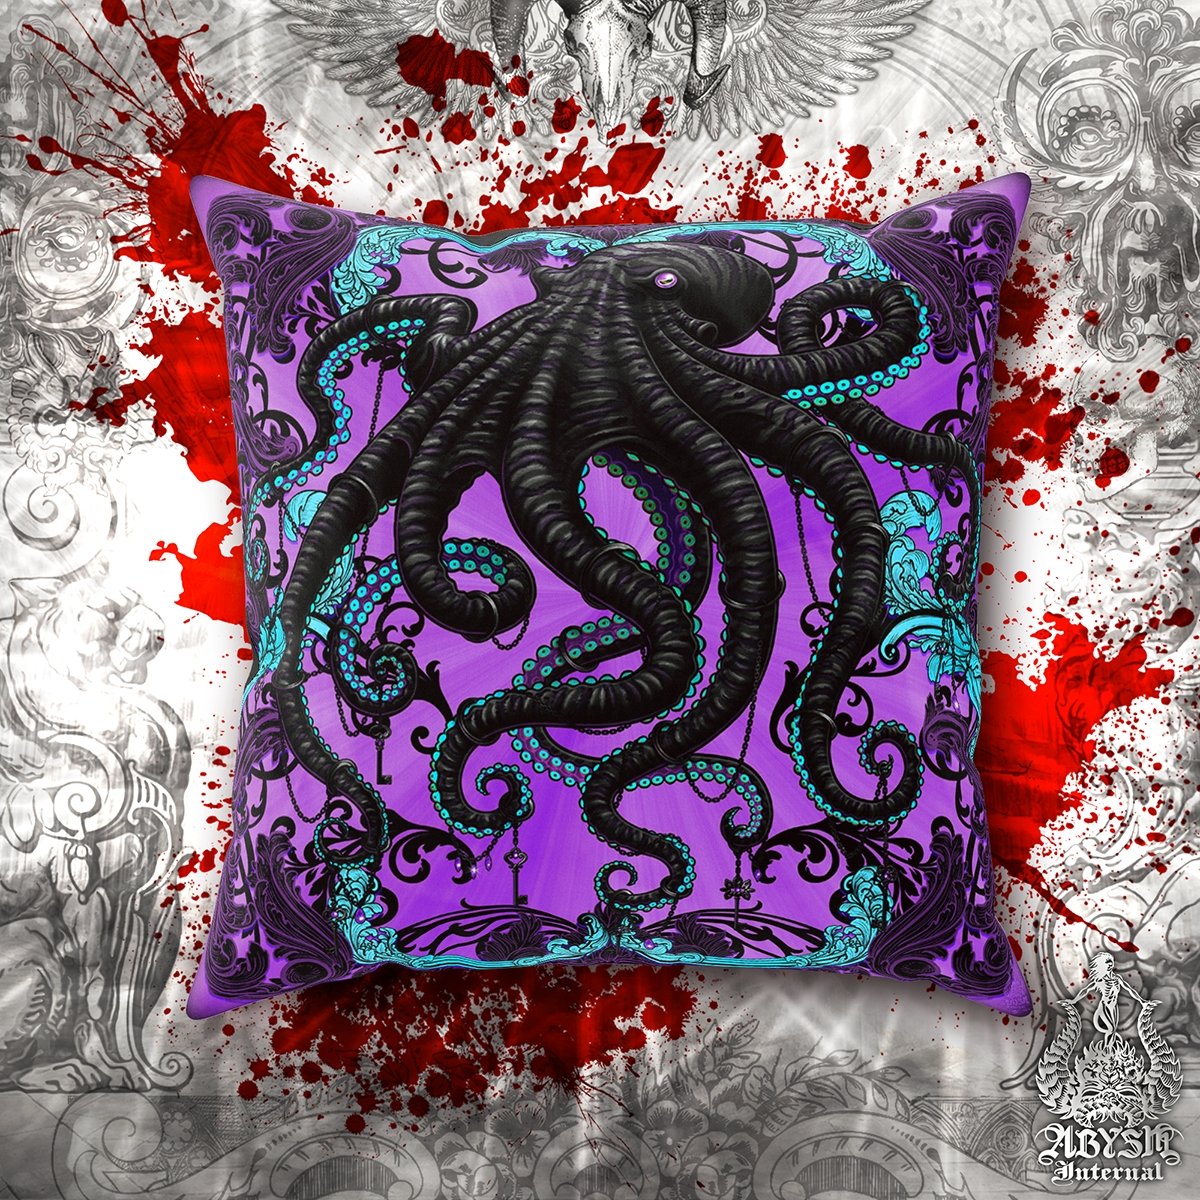 Pastel Goth Throw Pillow, Decorative Accent Pillow, Square Cushion Cover,  Whimsigoth Aesthetic, Gothic Room Decor, Octopus, Pastel Goth Home - Purple